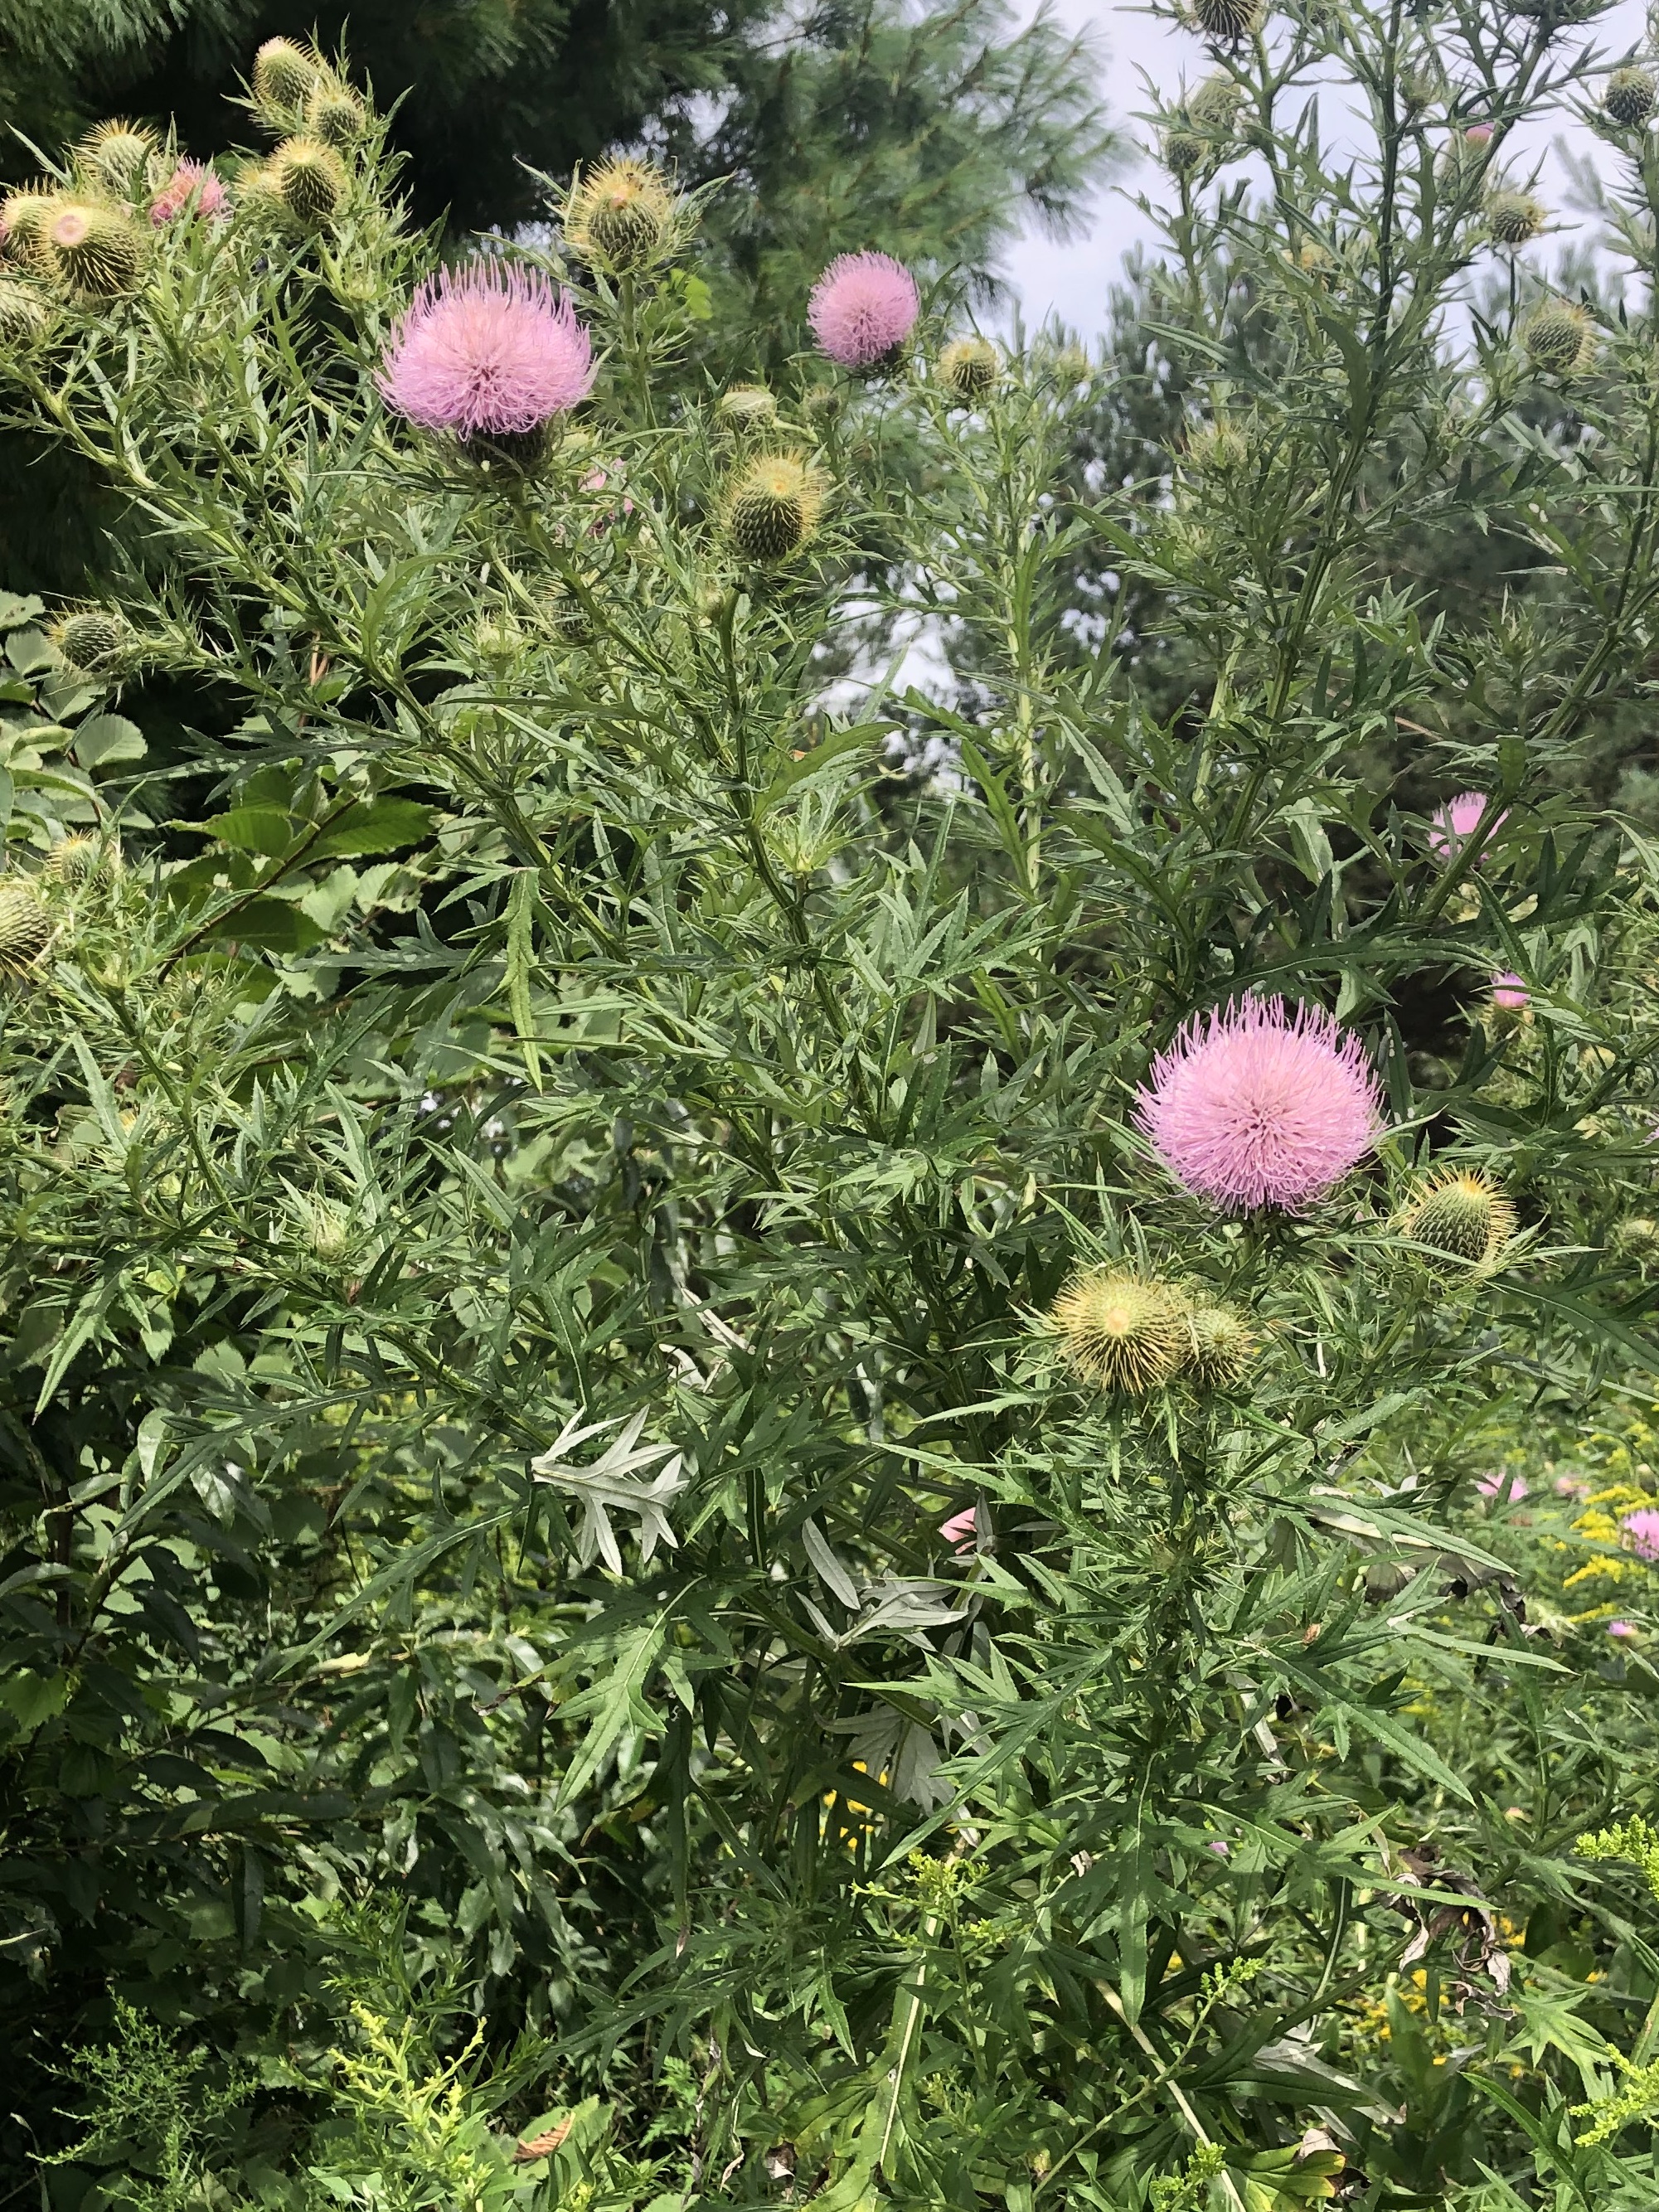 Field Thistle in the Prairie Moraine Dog Park in Verona, Wisconsin on August 15, 2022.